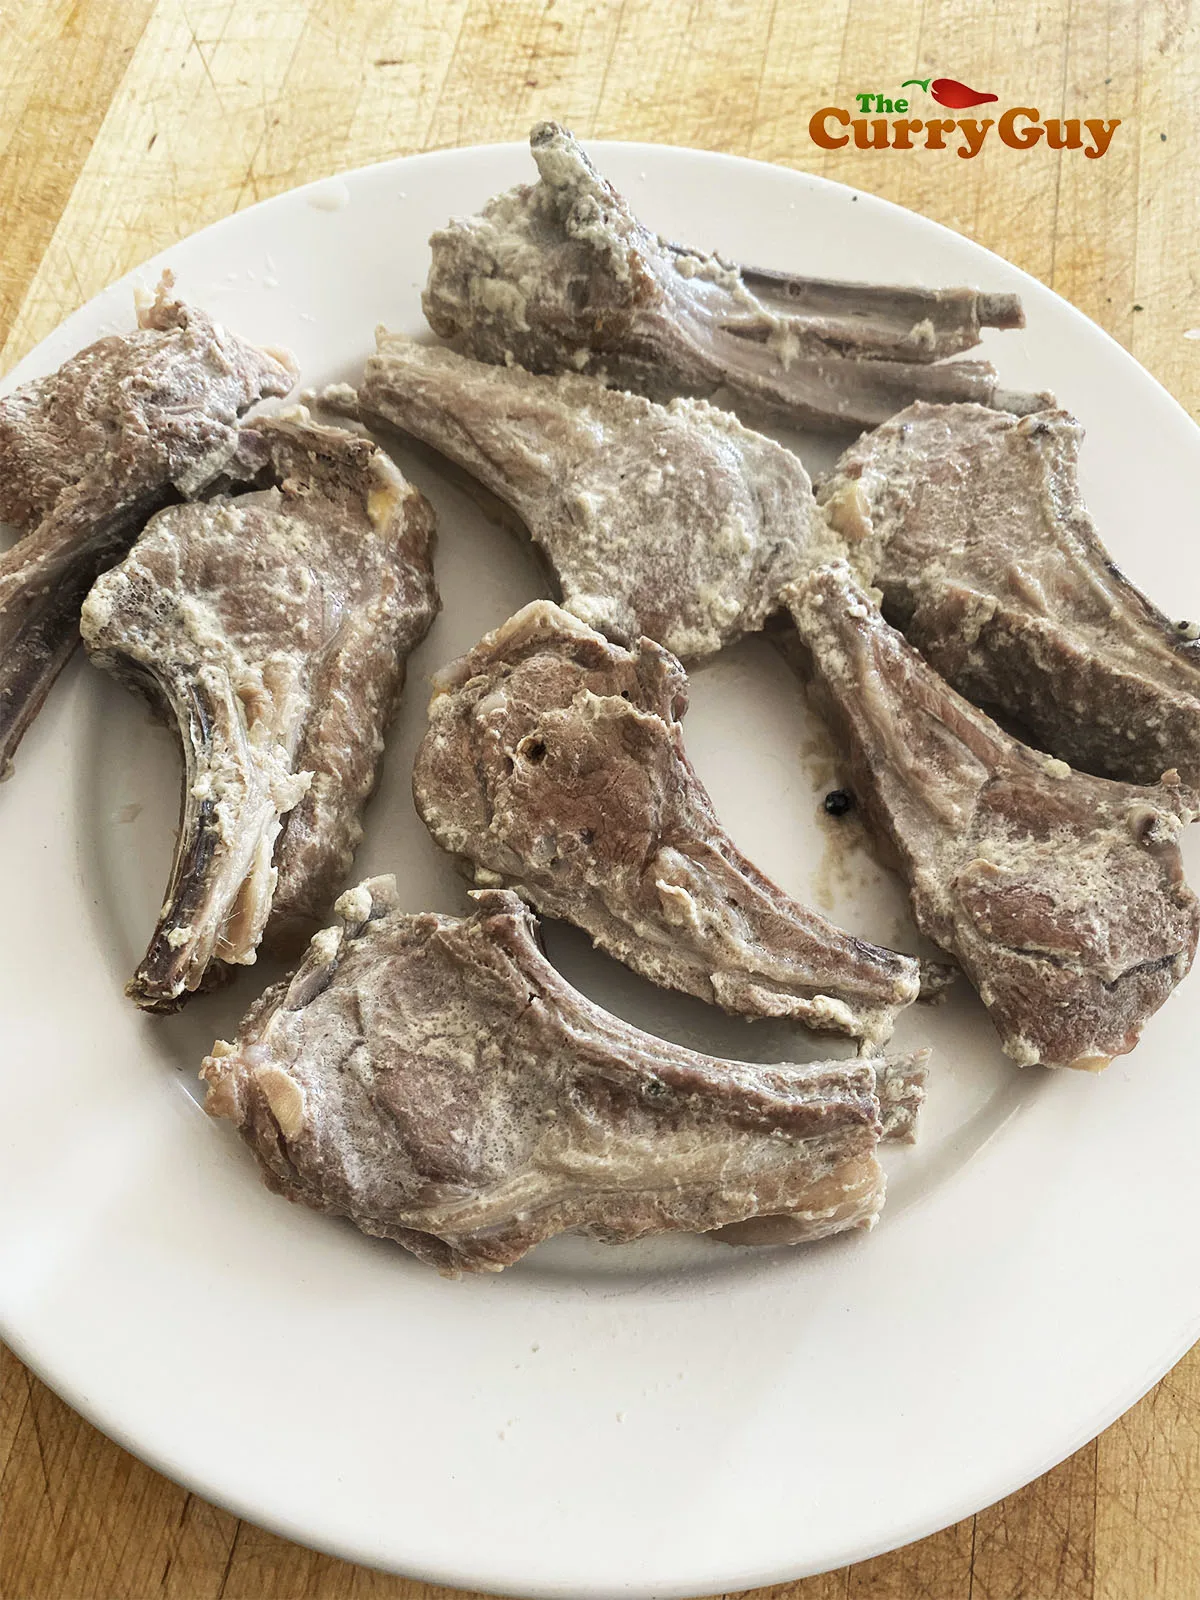 Lamb chops after being simmered. Patted dry.